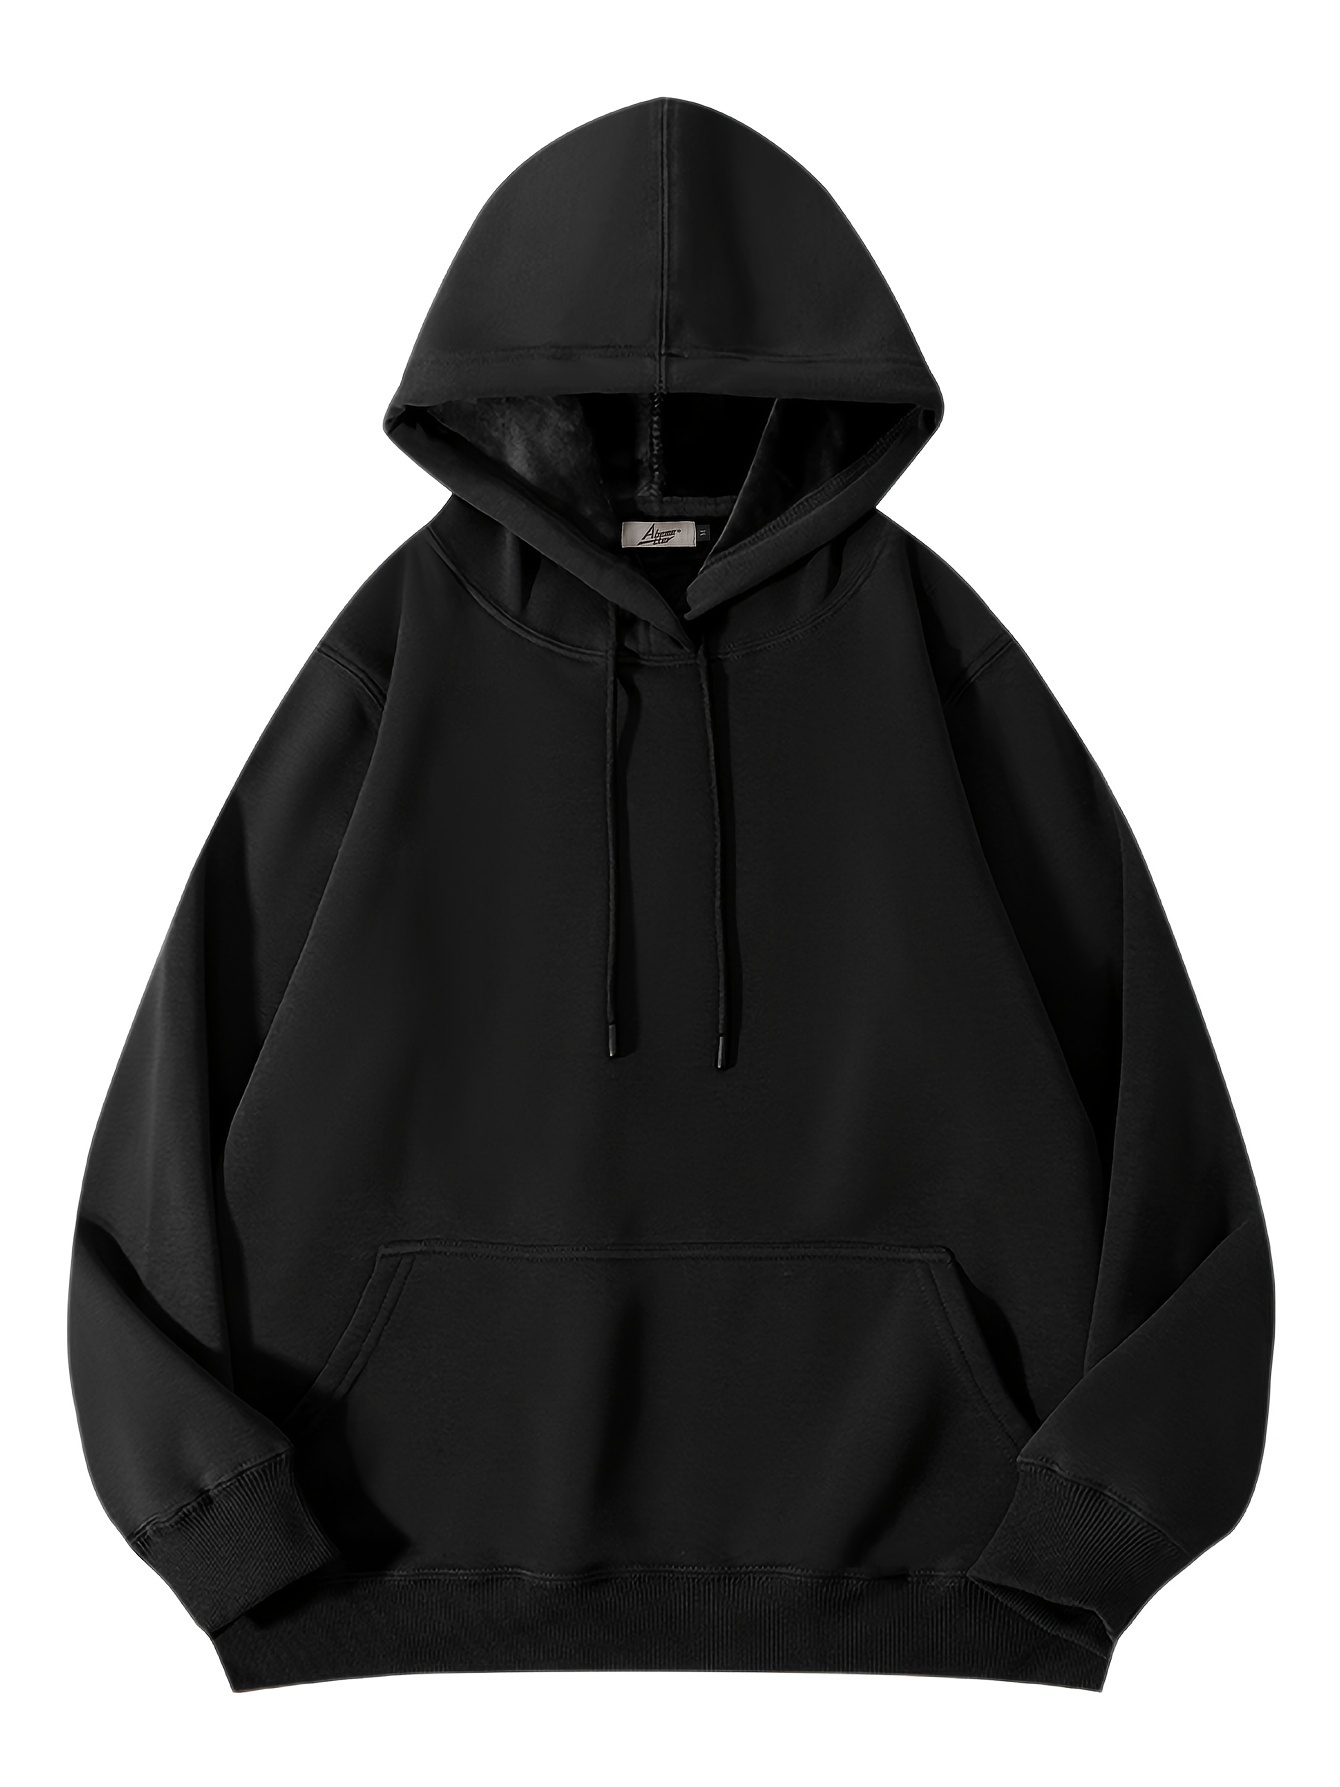 Winter Hoodies for Men Full Zip Fleece Lined Hooded Jacket Casual Slim Fit  Warm Thick Drawstring Sports Coat with Pockets at  Men's Clothing  store